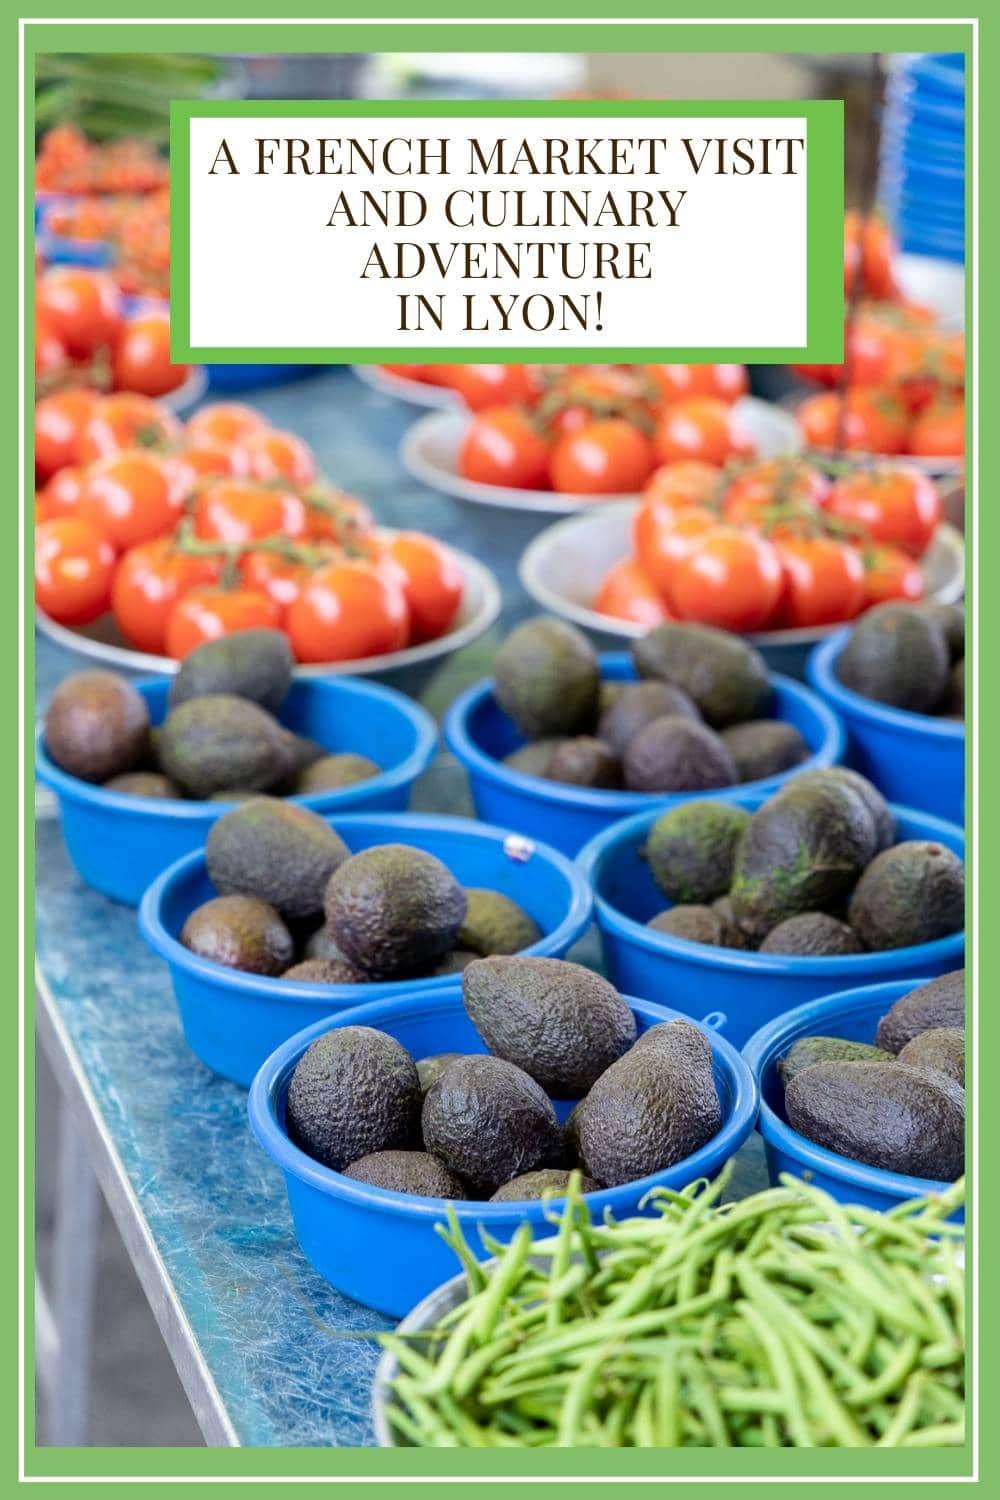 To Market, to Market! A Market Visit and Culinary Adventure in Lyon